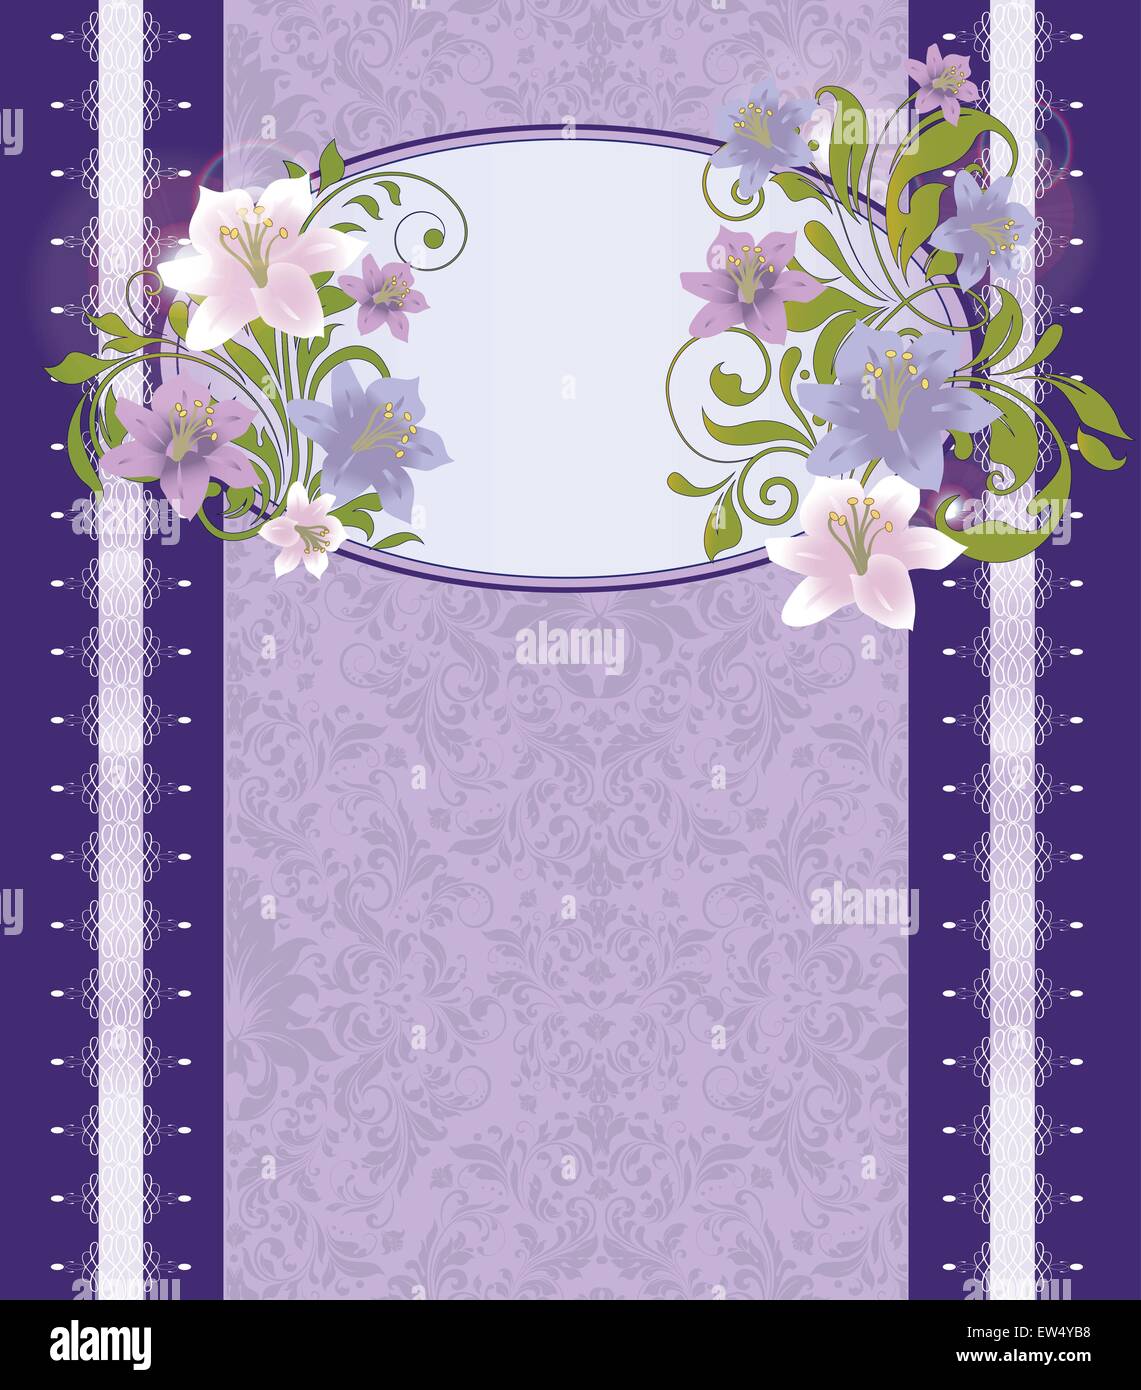 Vintage invitation card with ornate elegant retro abstract floral design,  pink violet and purple flowers and green leaves on blue violet background  with border and text label. Vector illustration Stock Vector Image